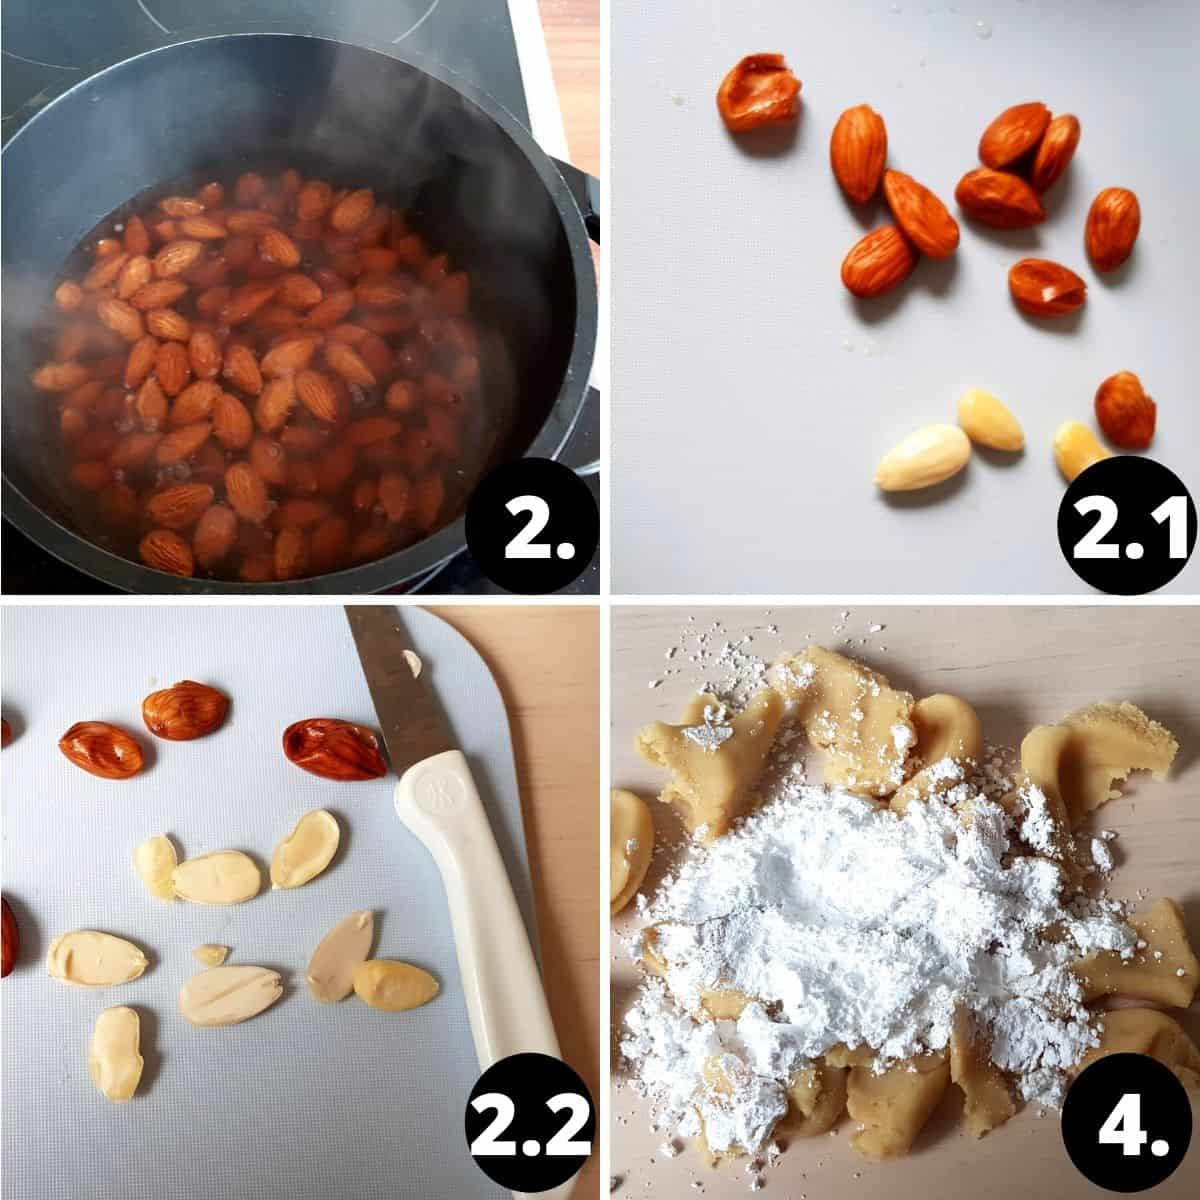 collage of 4 pictures for the bethmännchen recipe: 1. Almonds being boiled in saucepan. 2. Almonds being skinned. 3. Almonds being halfed with a knife. 4. Mazipan and icing sugar are being kneaded into a dough